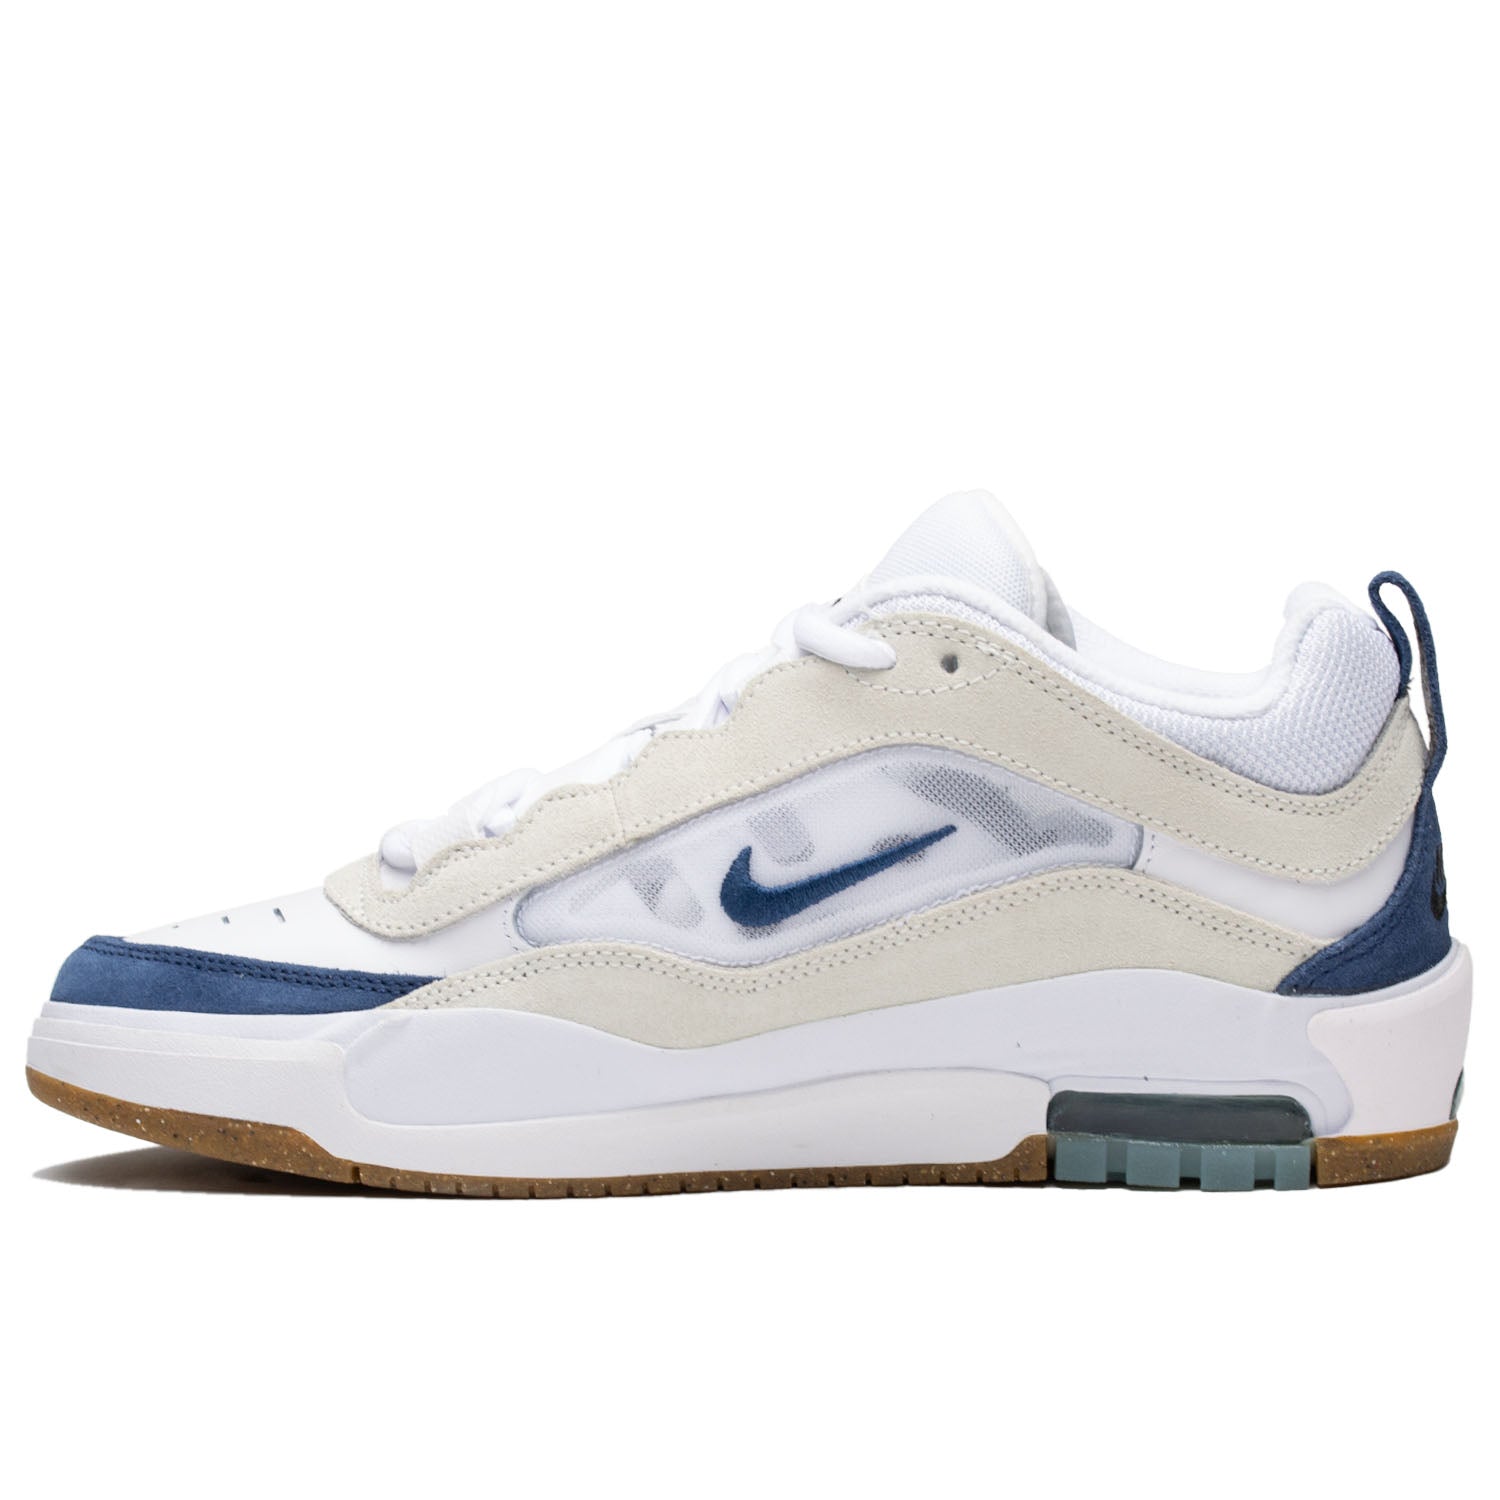 Nike SB - Air Max Ishod: '90s basketball-inspired, durable for intense skating, Max Air technology, flexible cupsole, "Ishod" details, "Wair" embroidery, herringbone outsole grip, White/Summit White/Black/Navy, Tinker Hatfield's Parisian architecture influence for comfort and support.